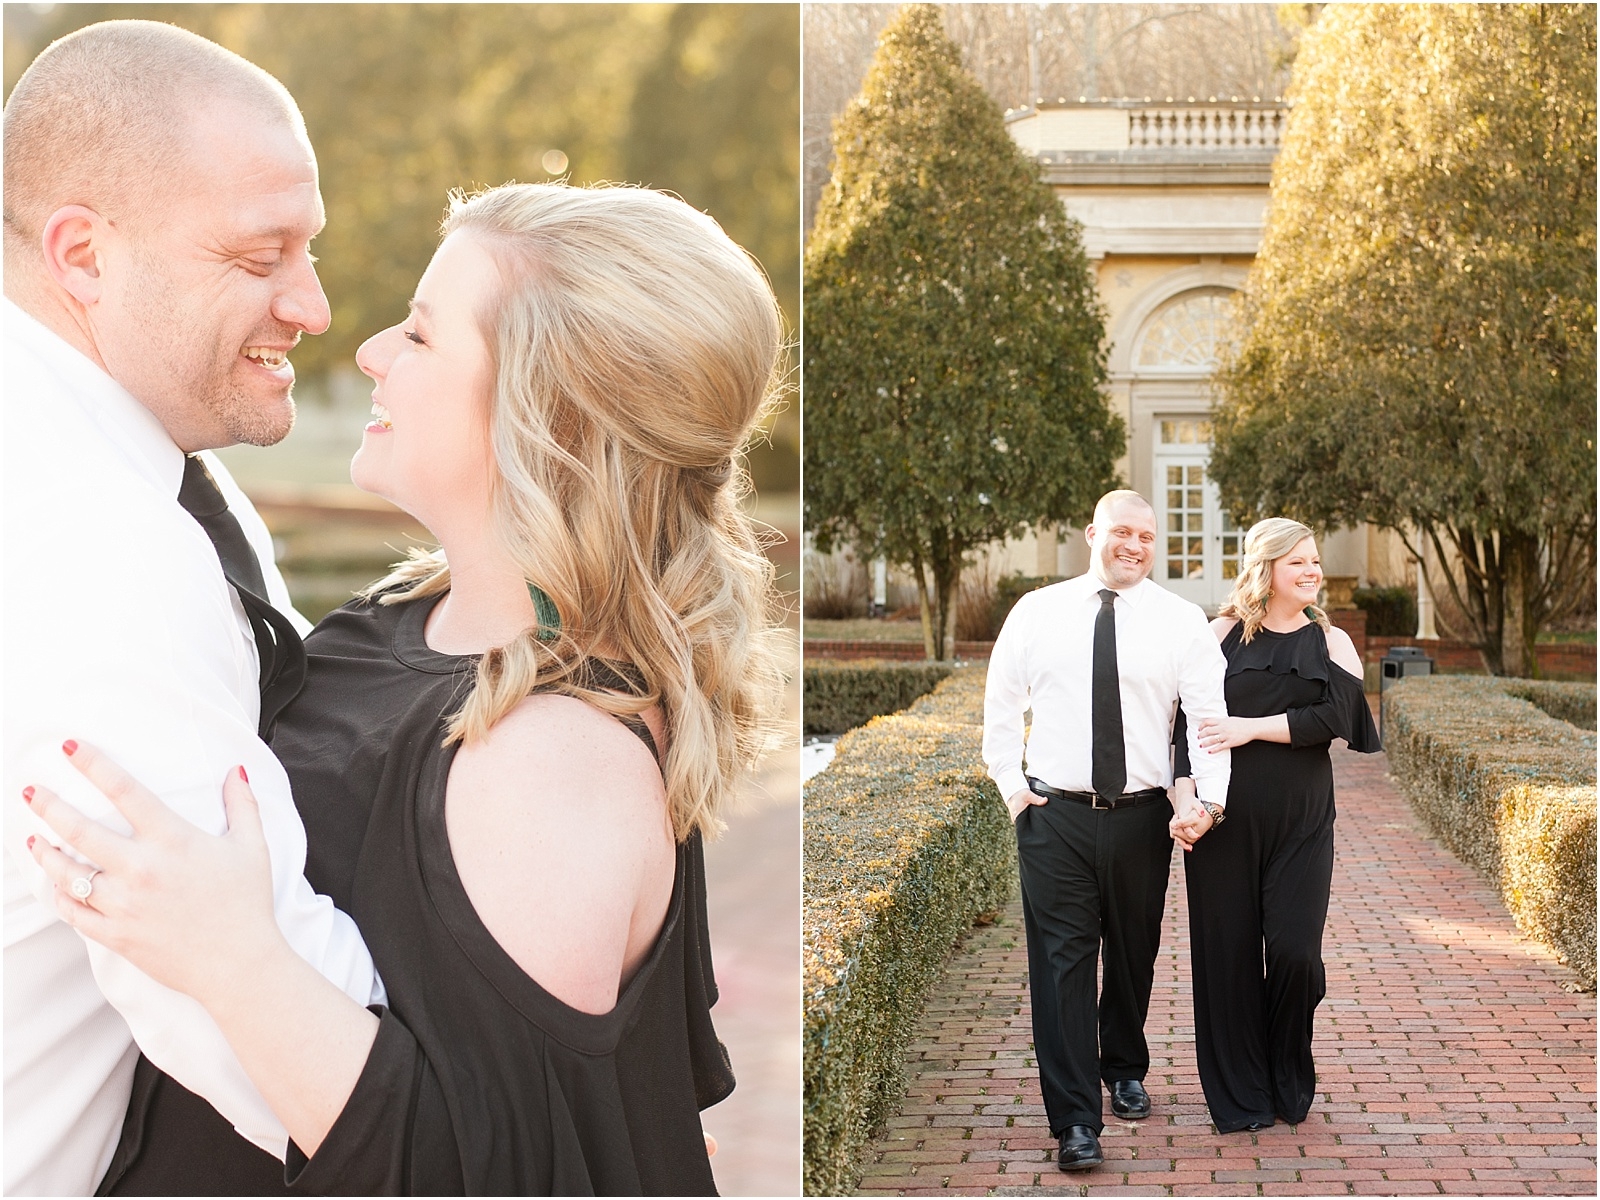 Jaclyn and Chris | Engaged-5.jpg